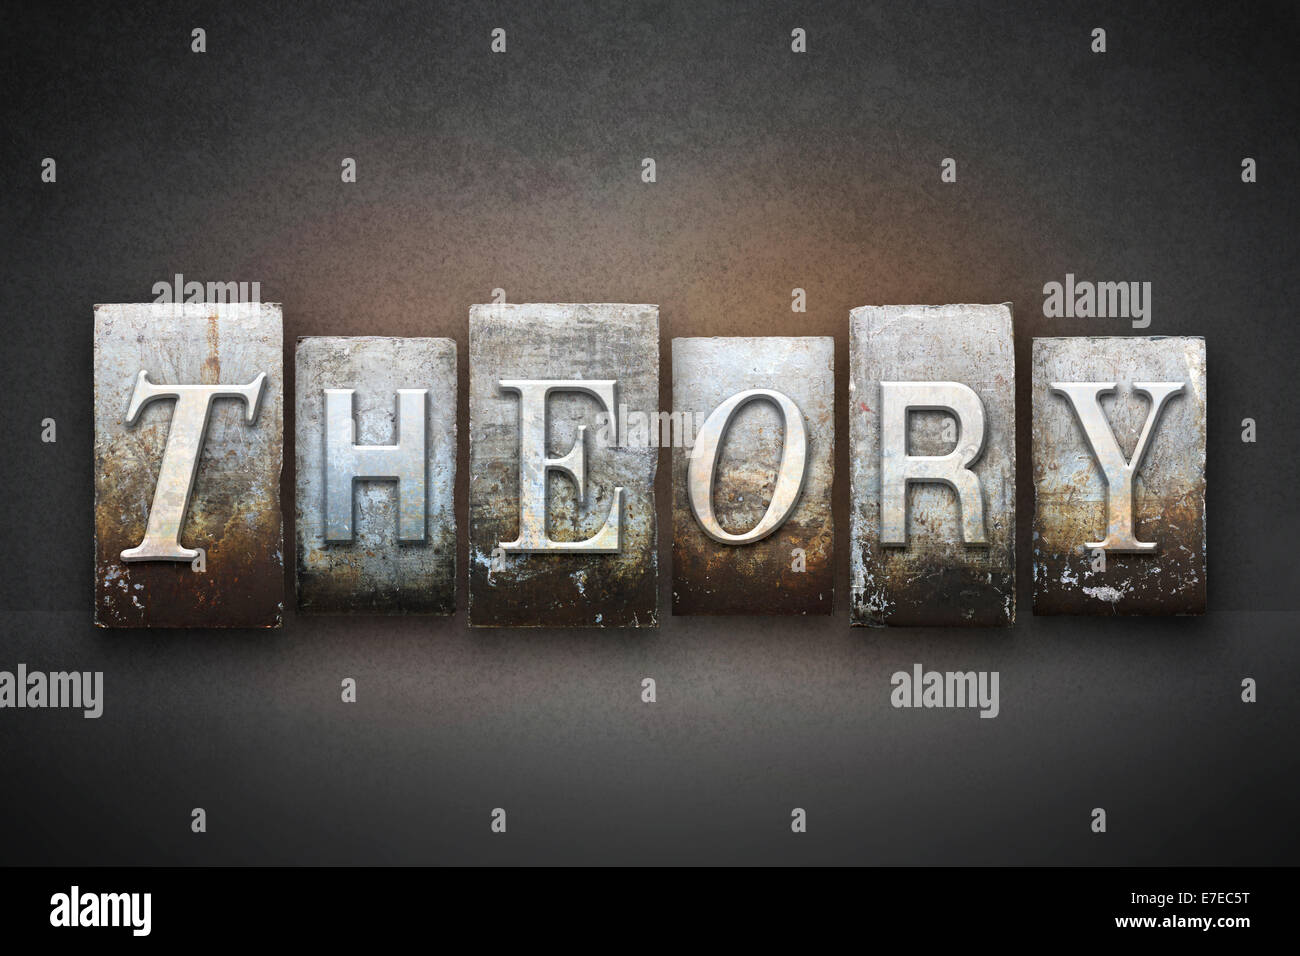 The word THEORY written in vintage letterpress type Stock Photo